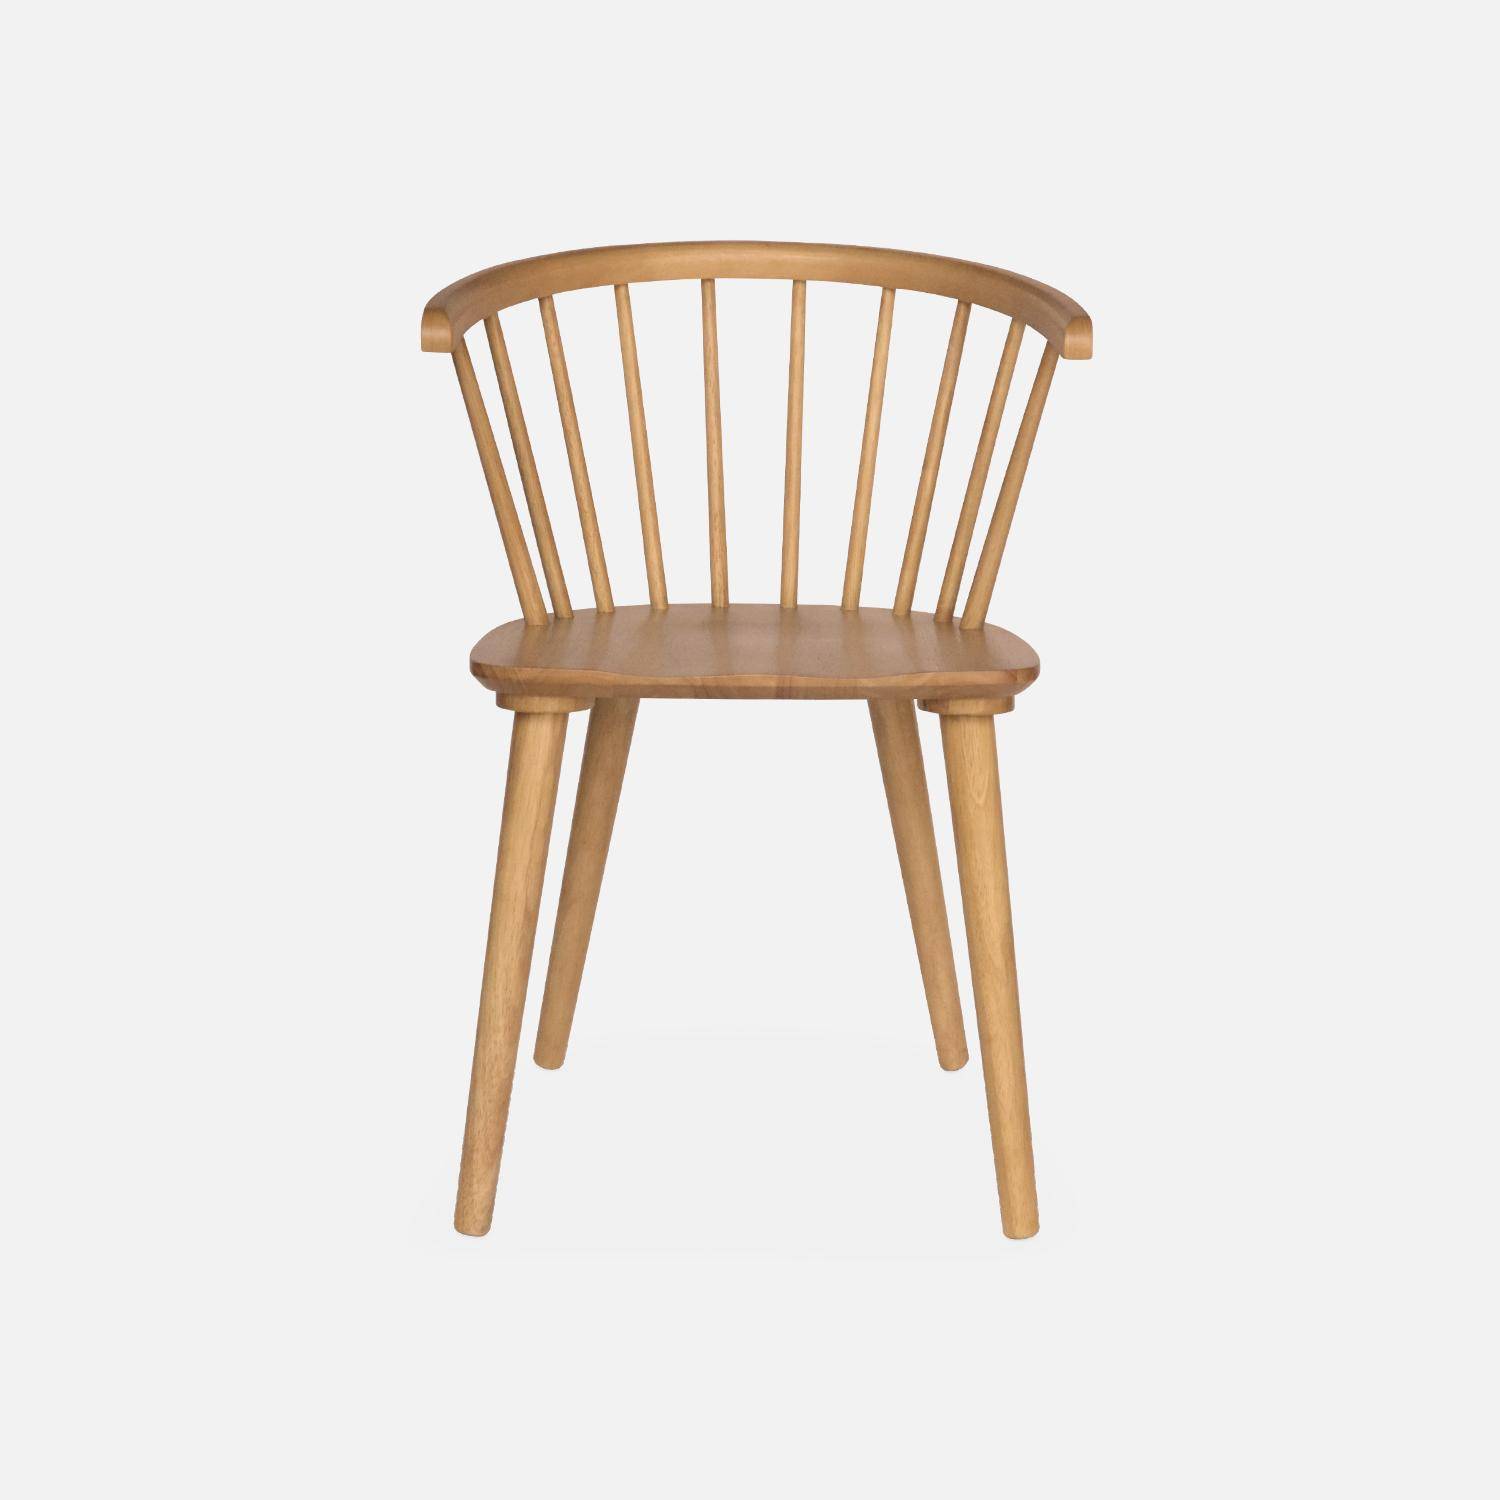 Pair of  Wood and Plywood Spindle Chairs, natural, L53 x W47.5 x H76cm  Photo4